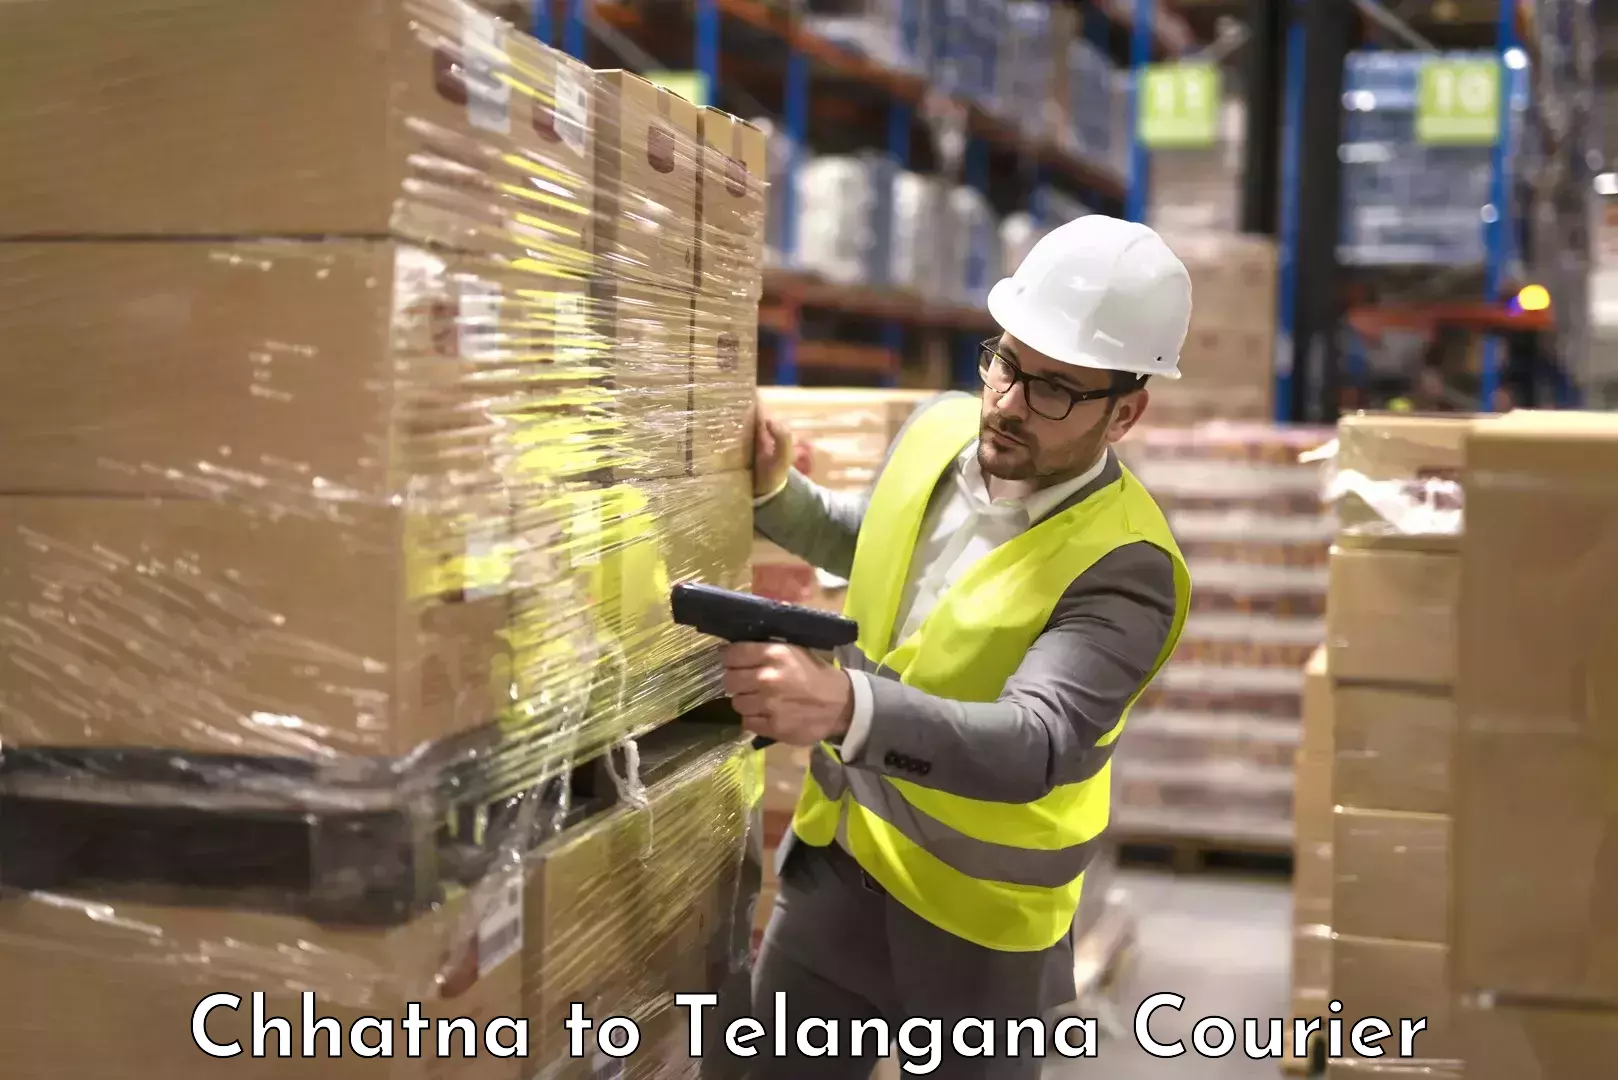 Luggage shipment specialists Chhatna to Medchal